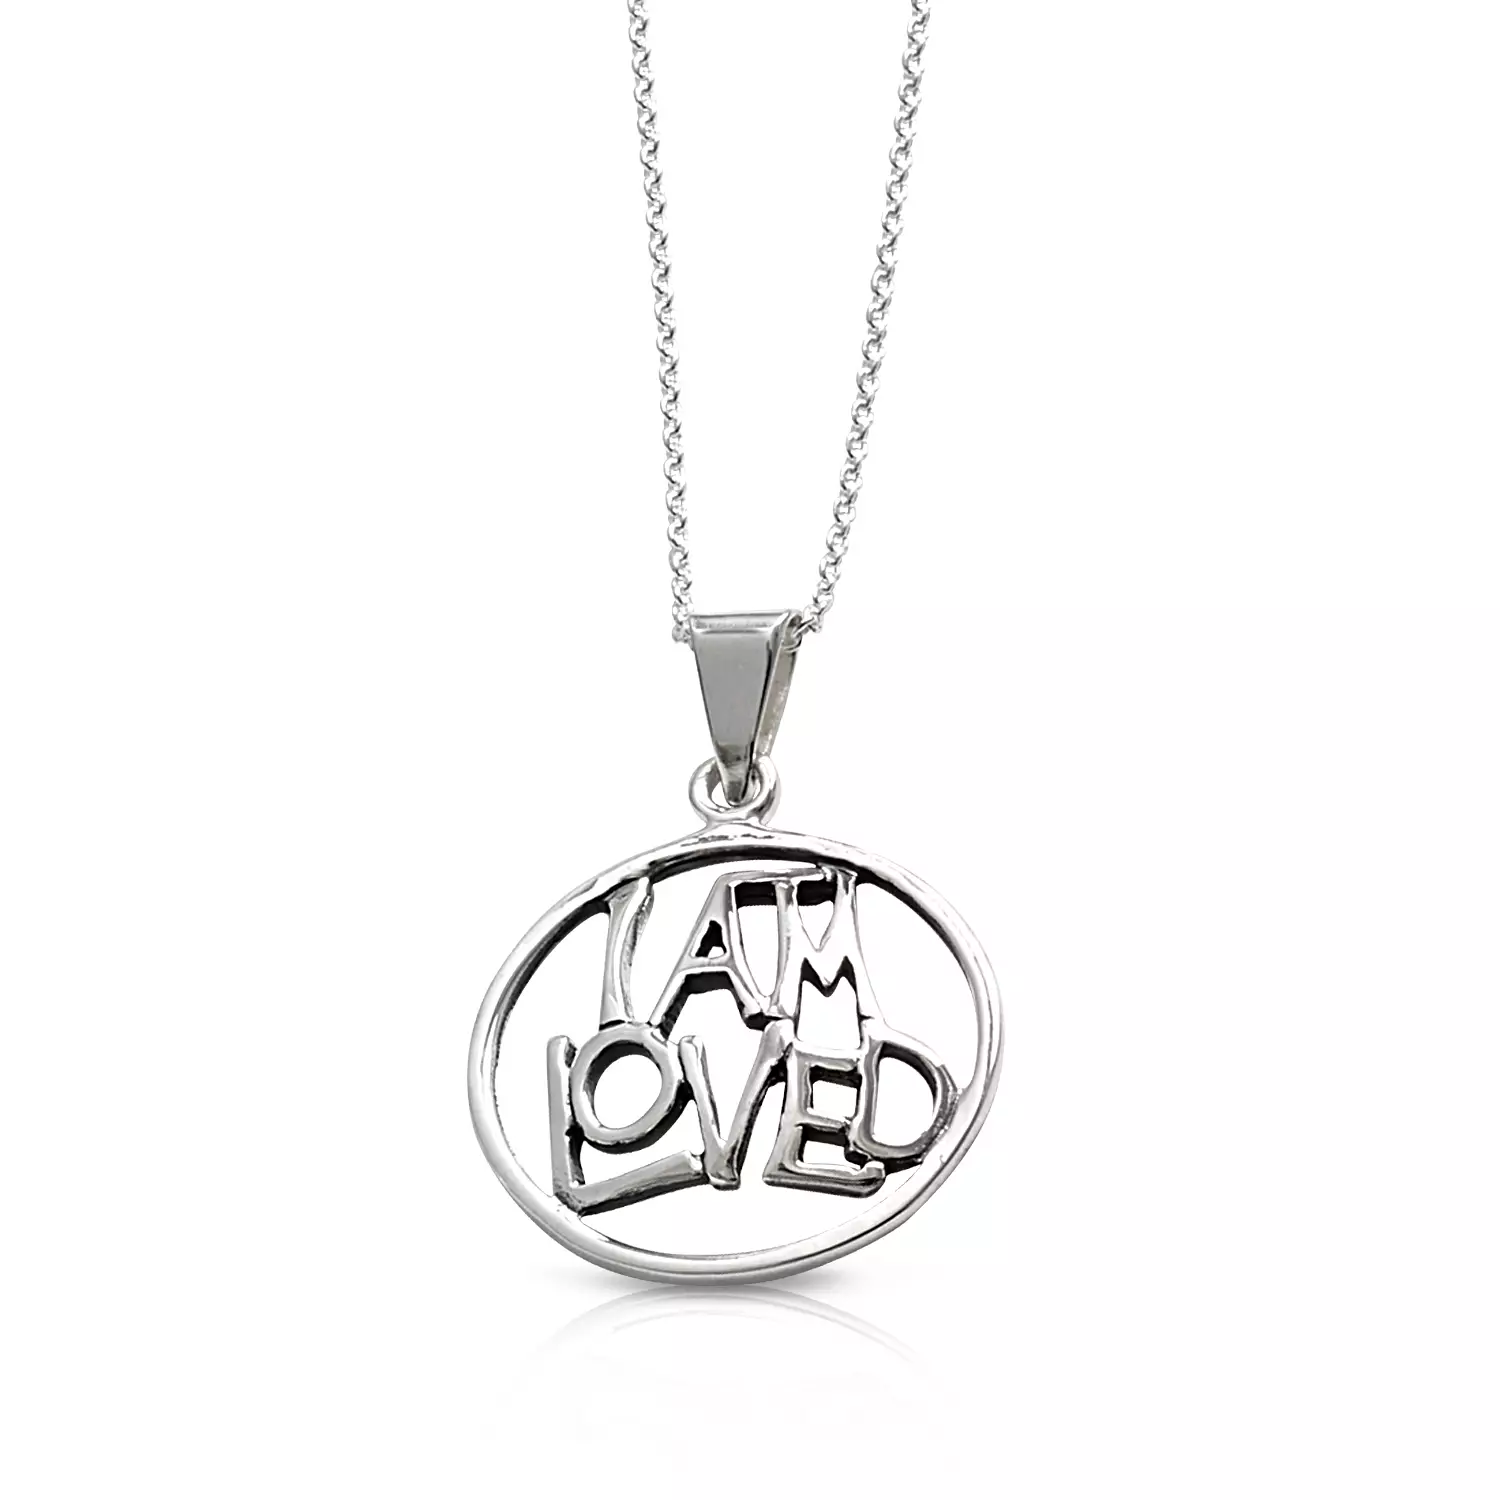 Sterling silver 'I AM LOVED' Pendant